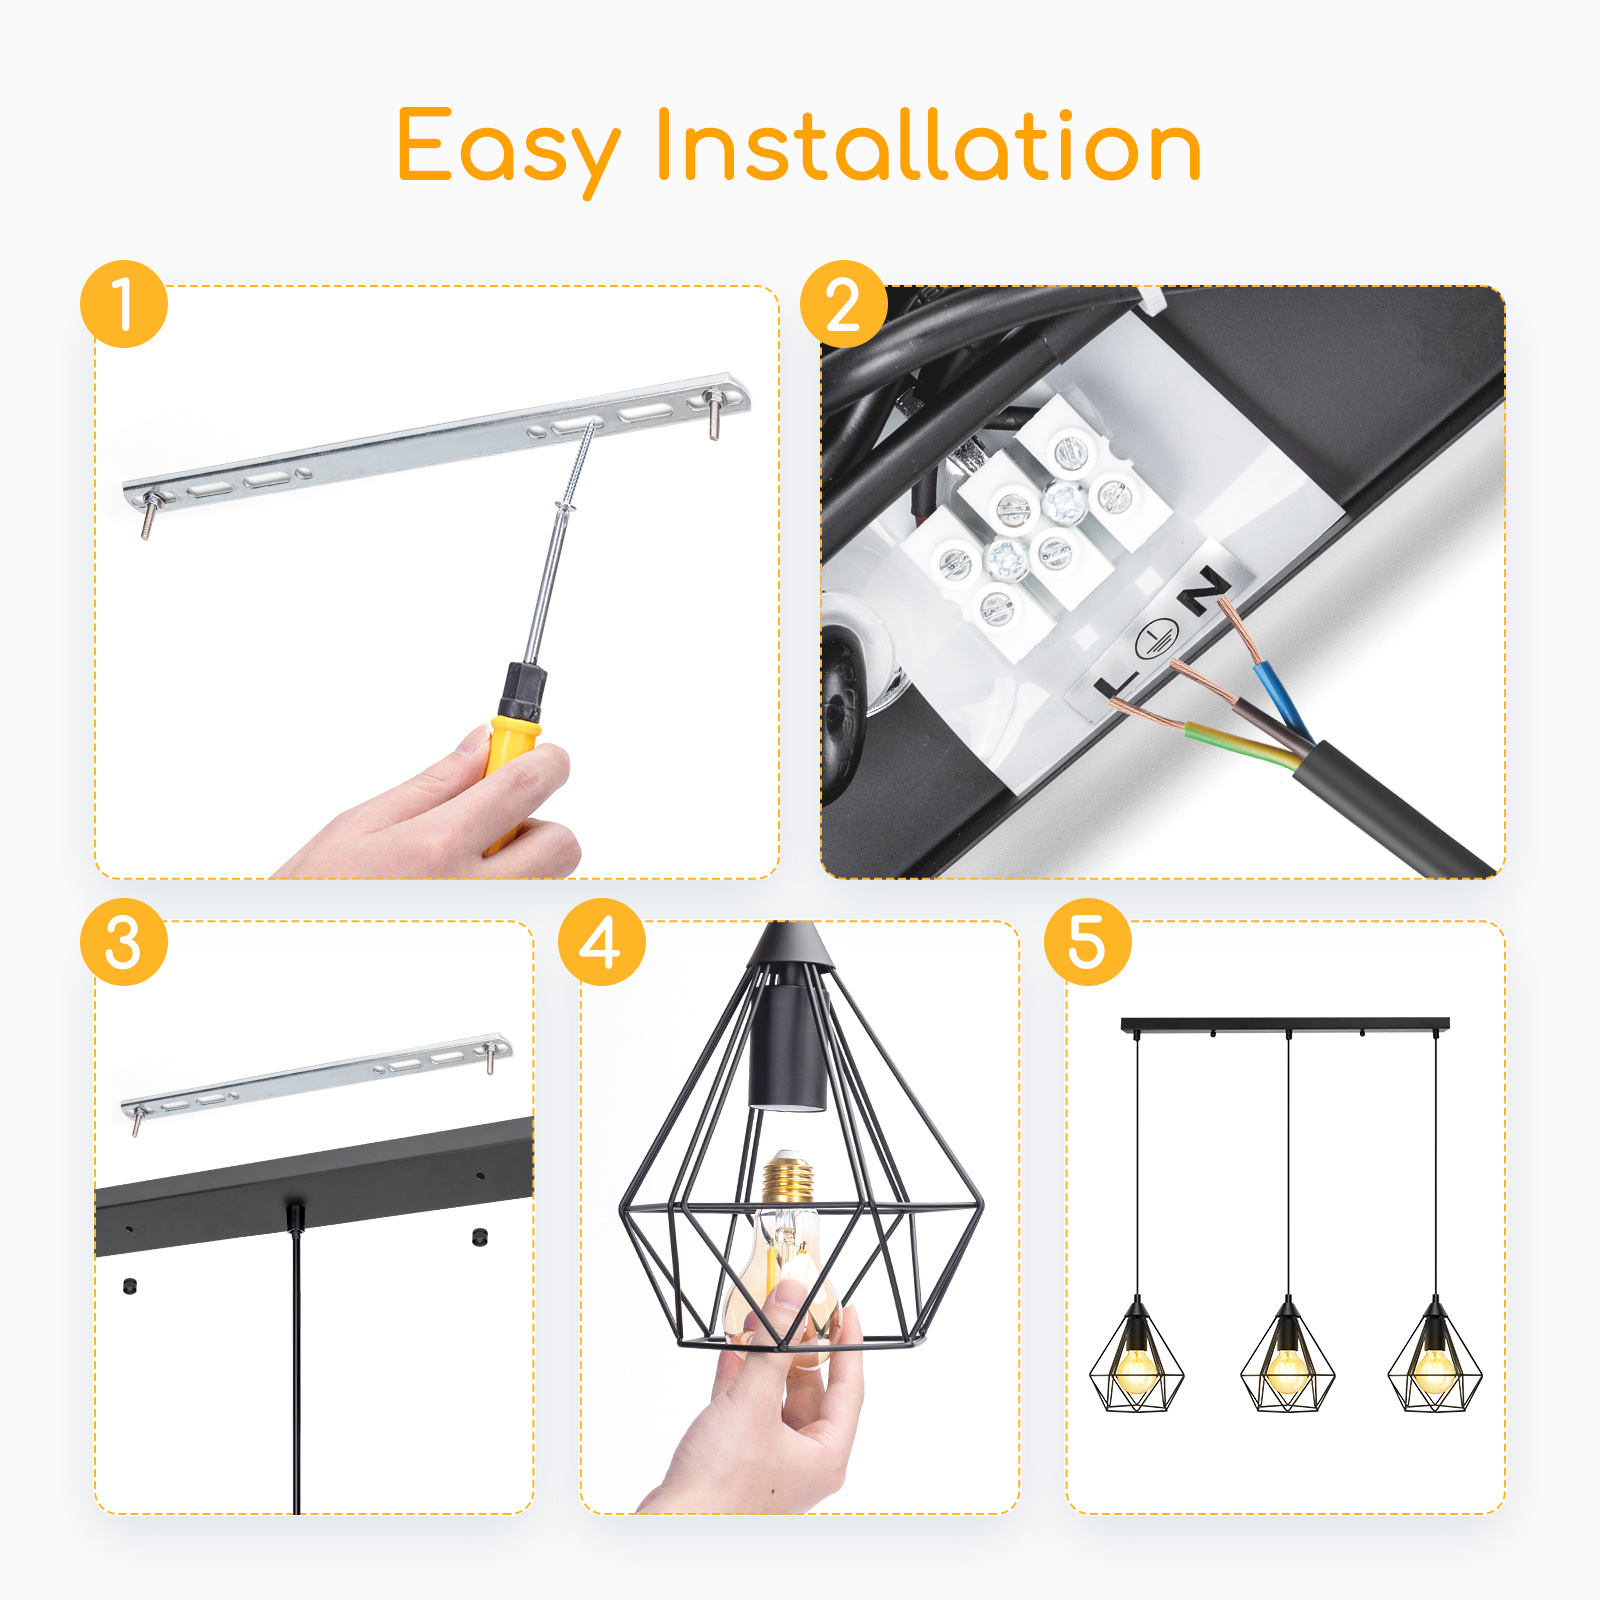 Aigostar hanging lamp with iron frame